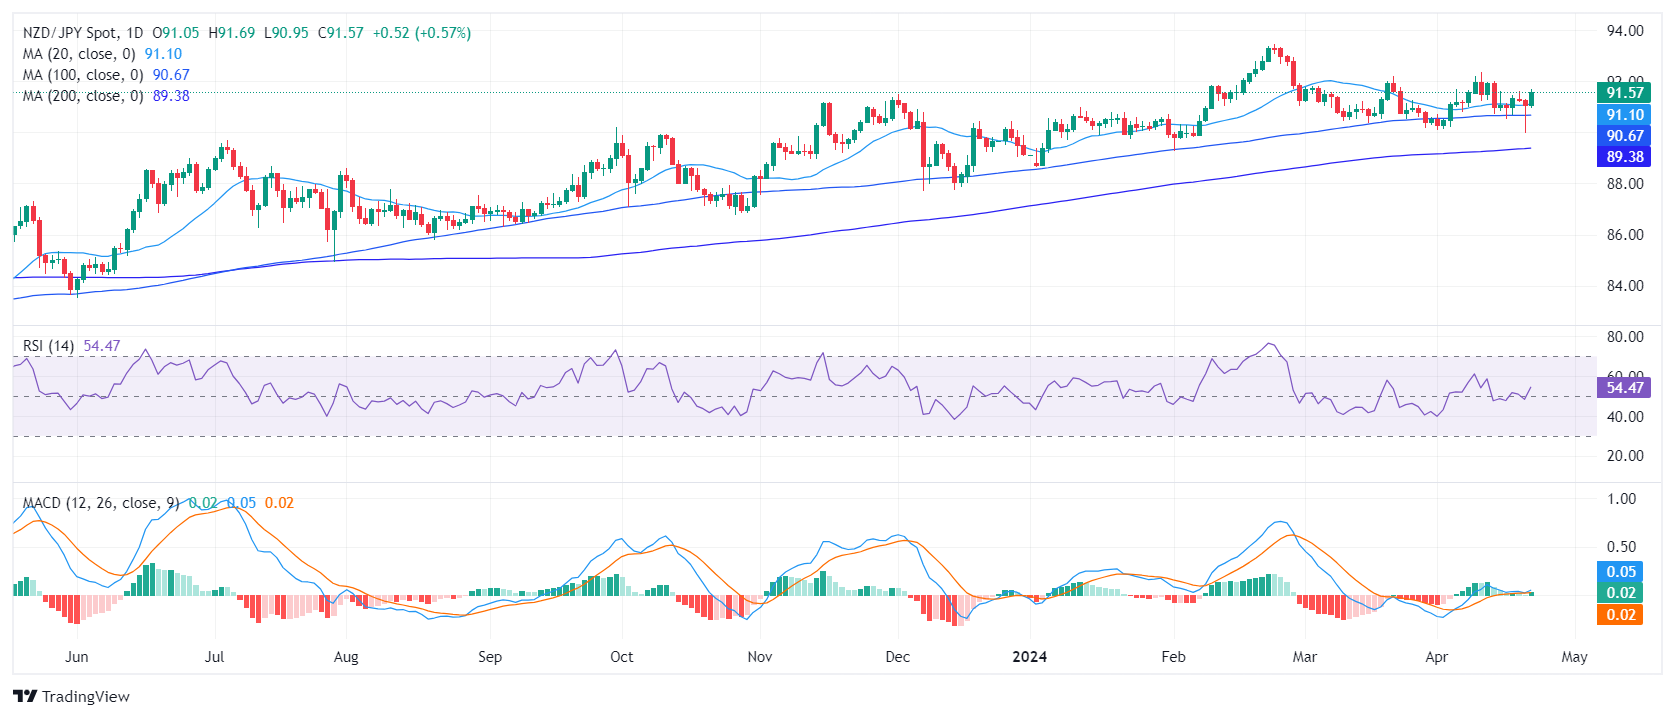 NZD/JPY Price Analysis: Bullish momentum gains as bears failed to conquer the 20-day SMA